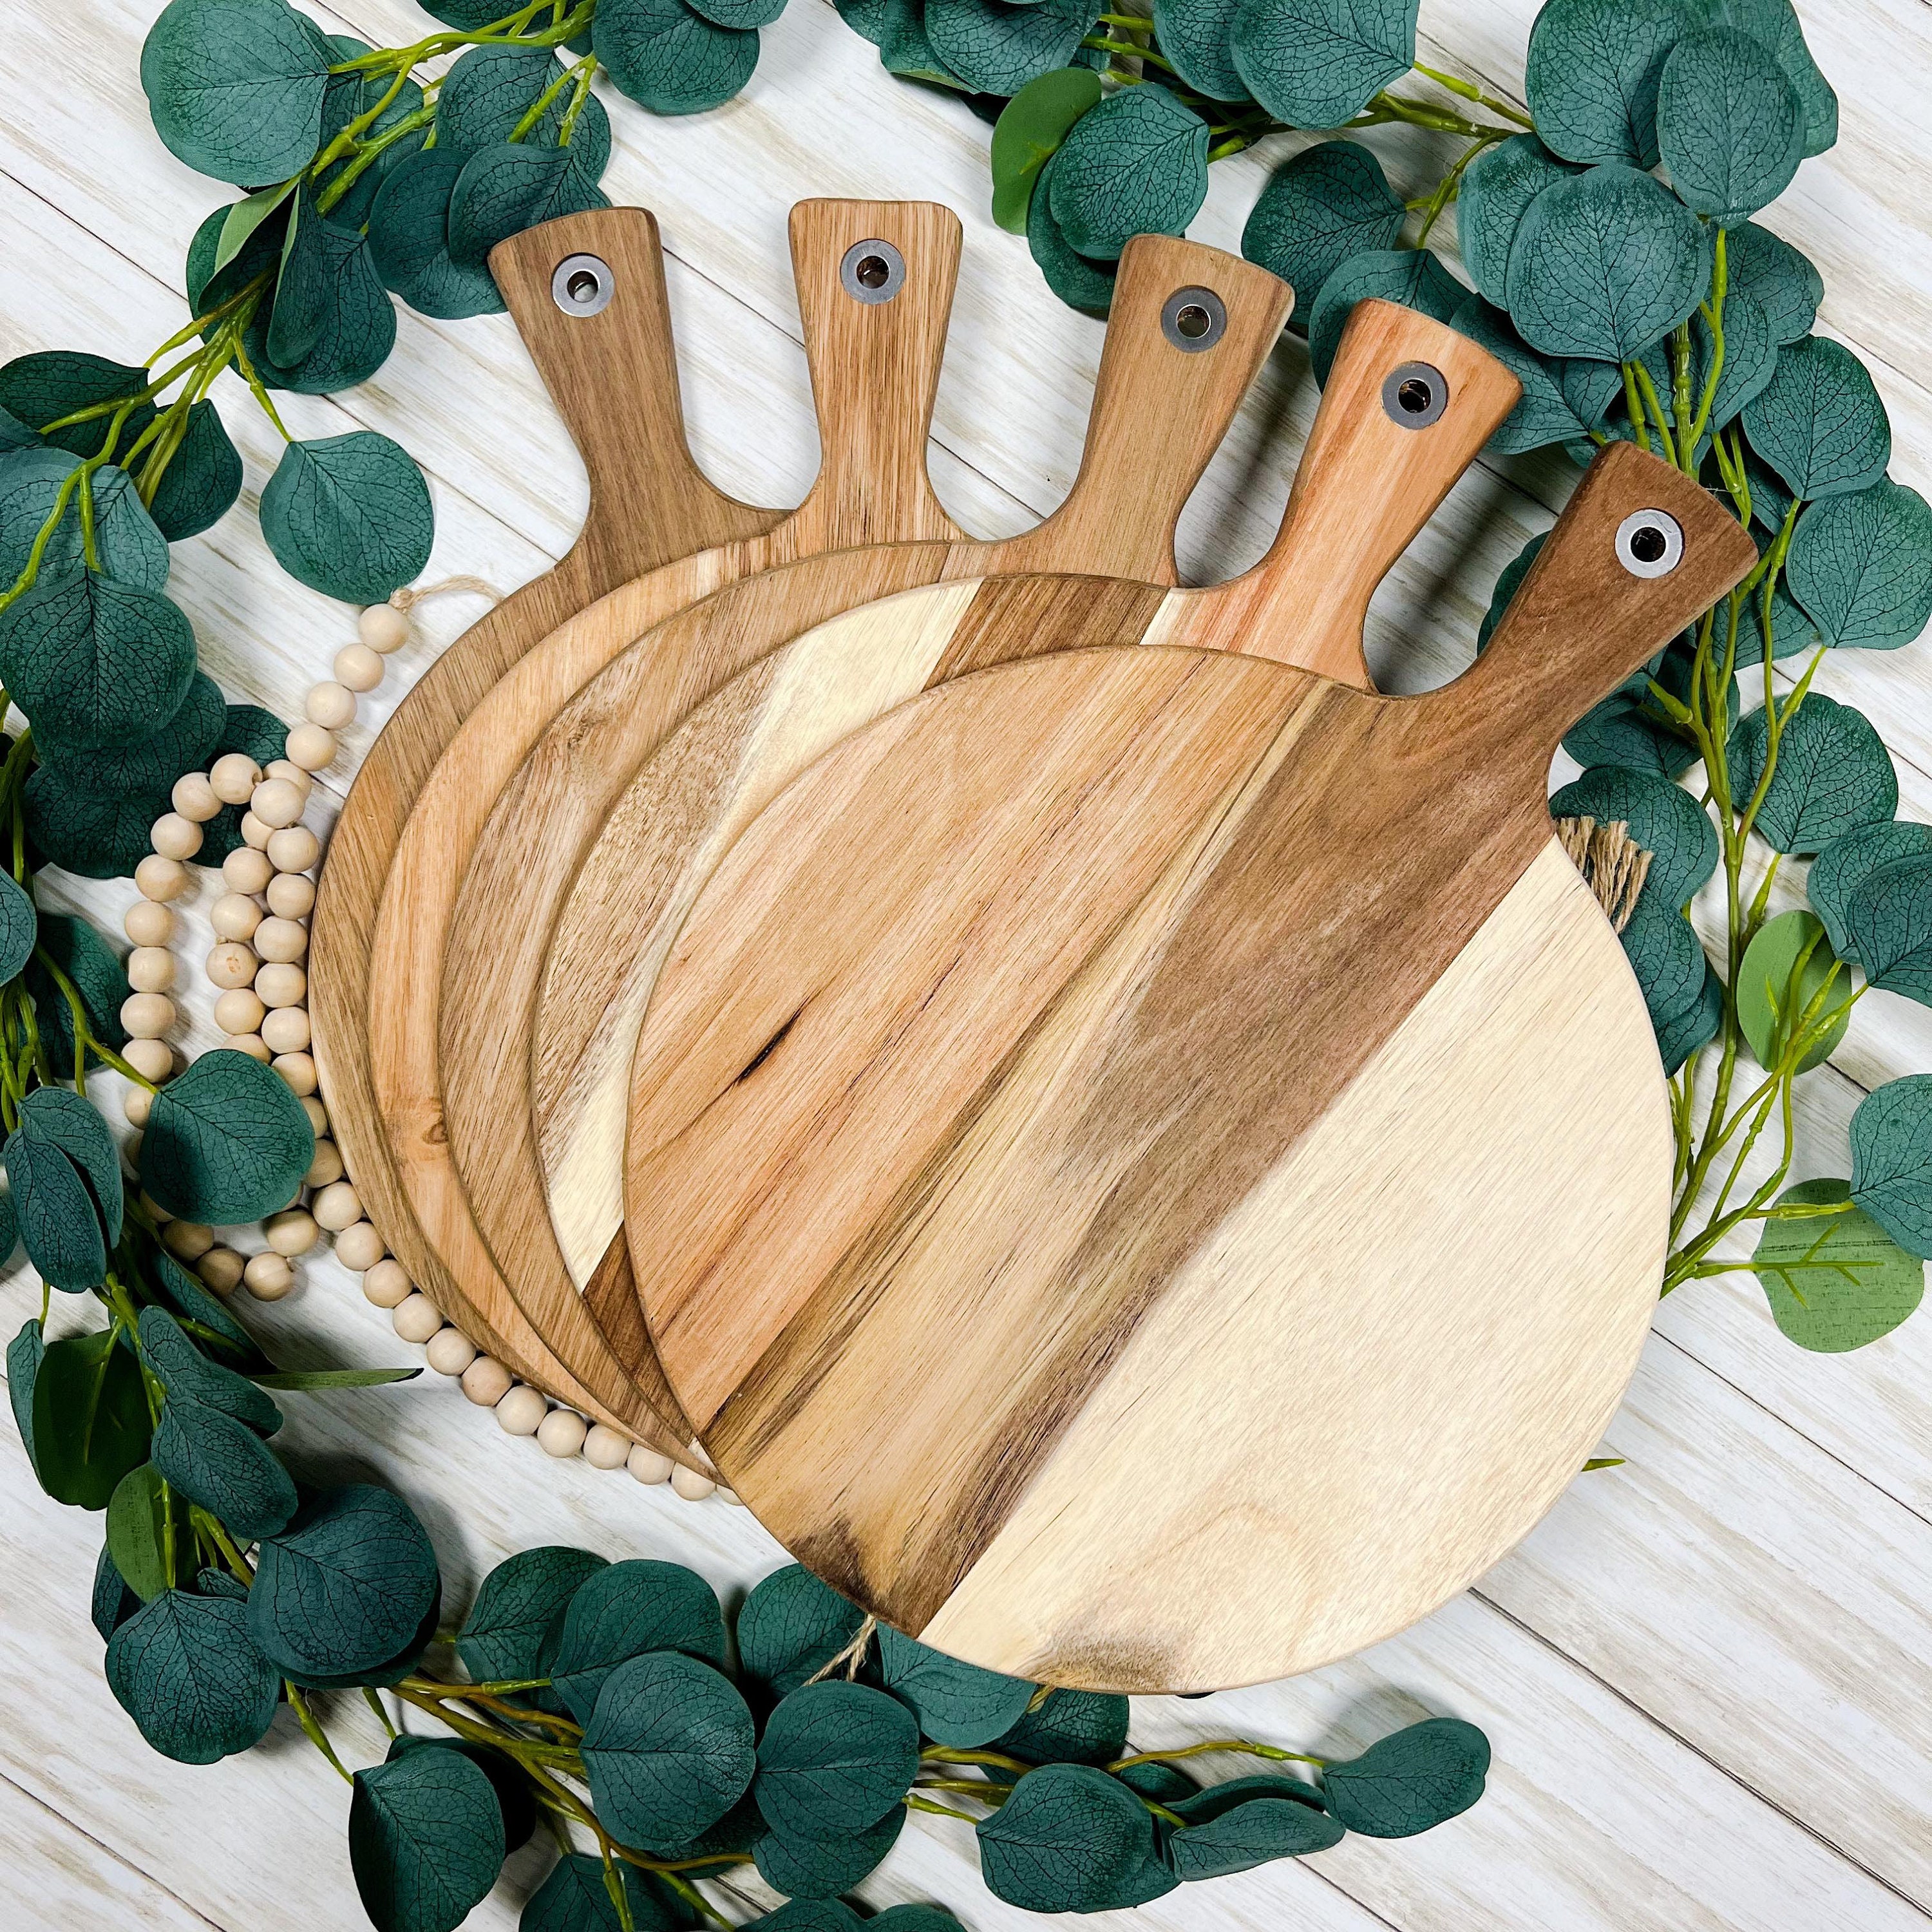 D-GROEE 6Pcs/Set Mini Wooden Cutting Board Craft with Handle